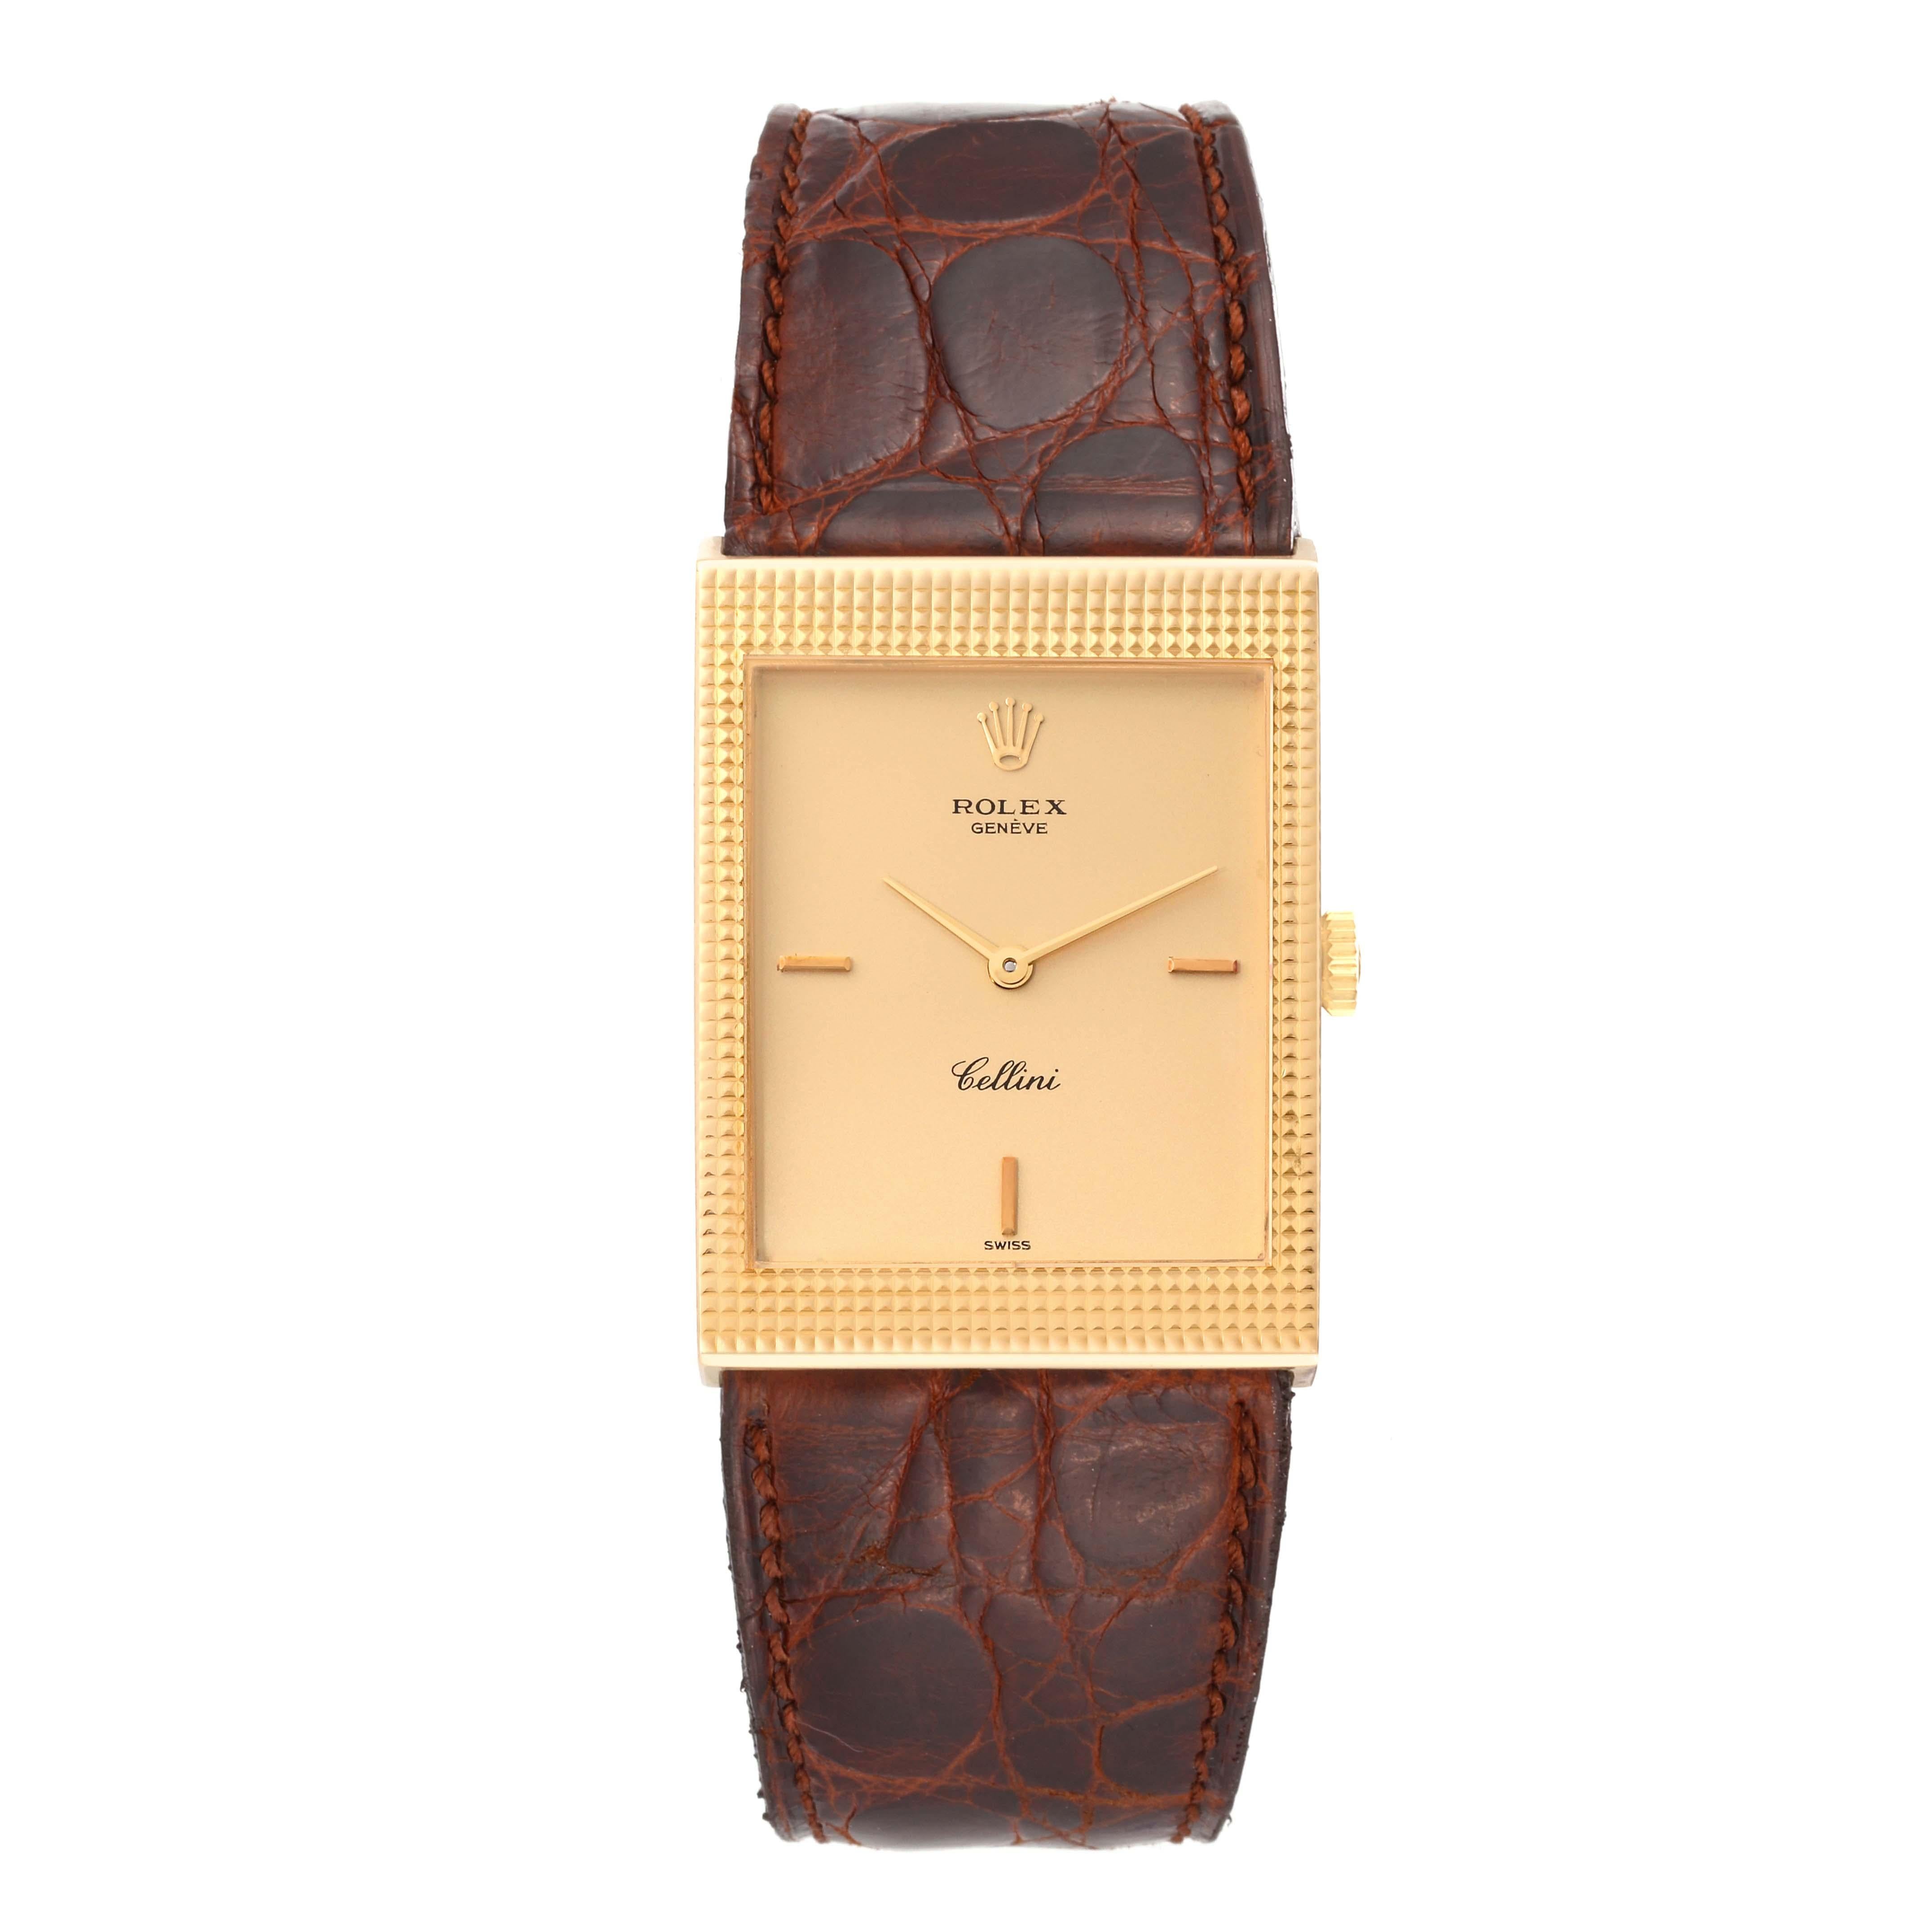 Rolex Cellini Yellow Gold Champagne Dial Vintage Mens Watch 4127. Manual winding movement. 18k yellow gold  rectangular case 24.0 x 33.0 mm. Rolex logo on a crown. Hooded lugs. . Mineral glass crystal. Champagne dial with yellow gold baton hour